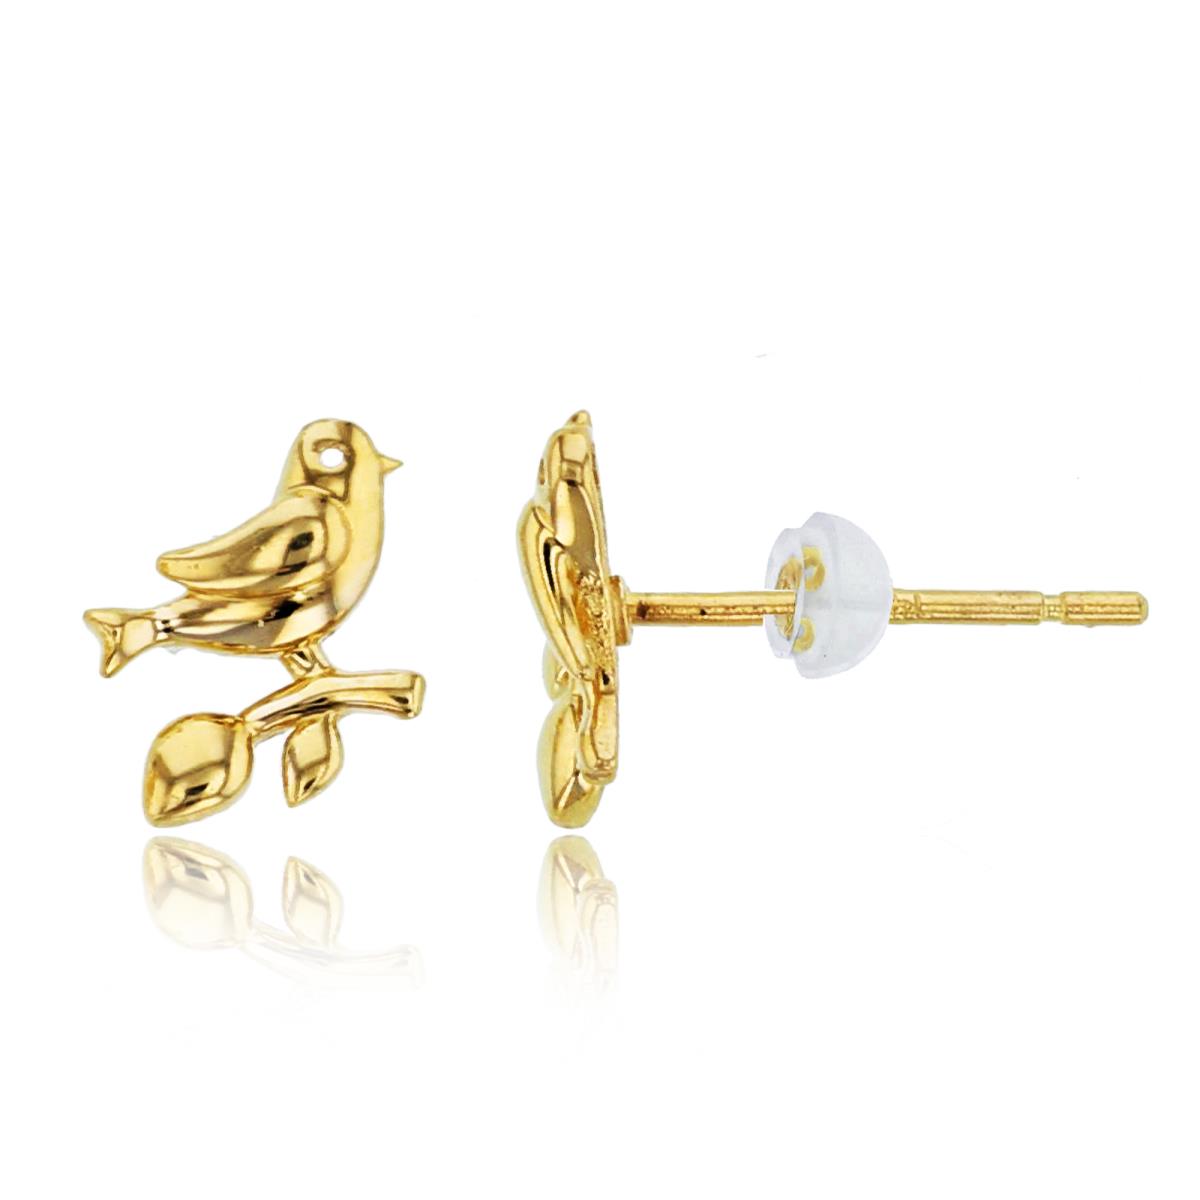 10K Yellow Gold High Polished Bird Studs with Silicone Backs